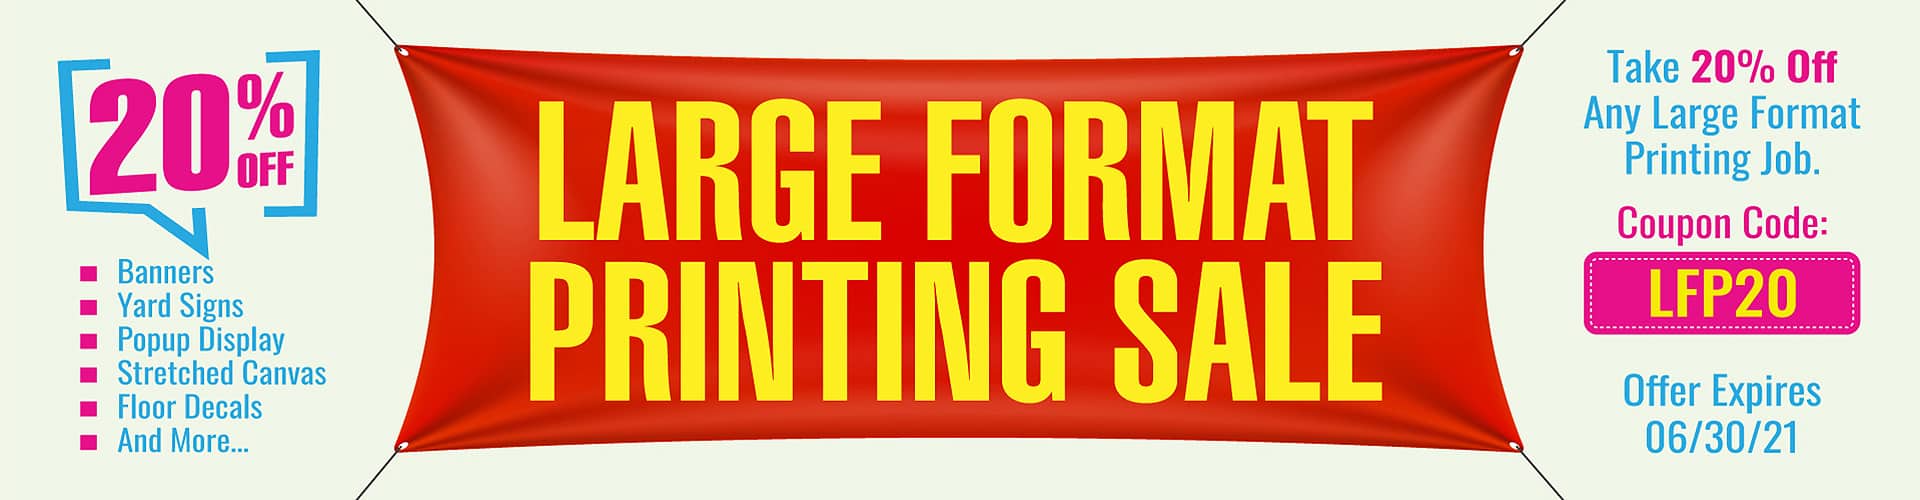 Large Format Printing 20 percent off special